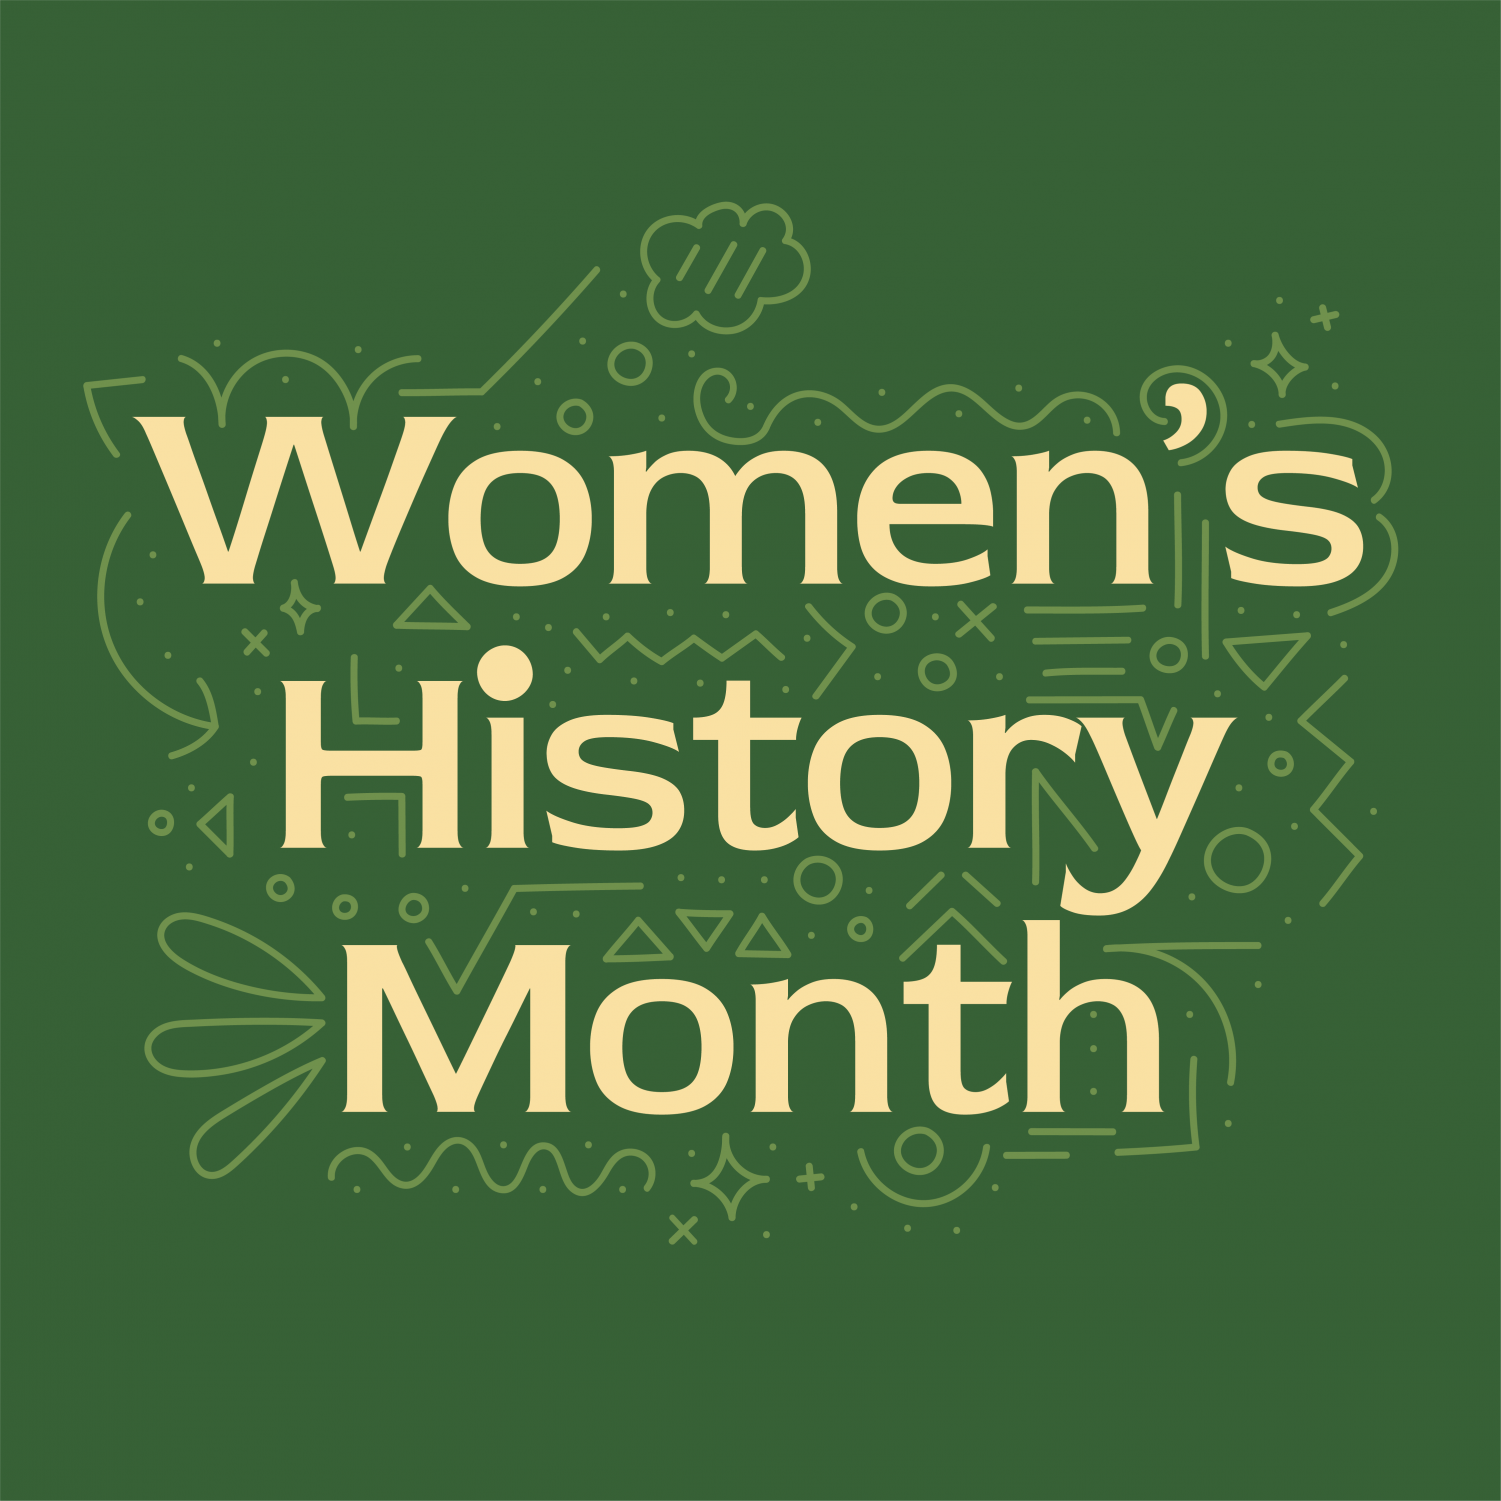 Womens+History+Month%3A+Rosalind+Franklin